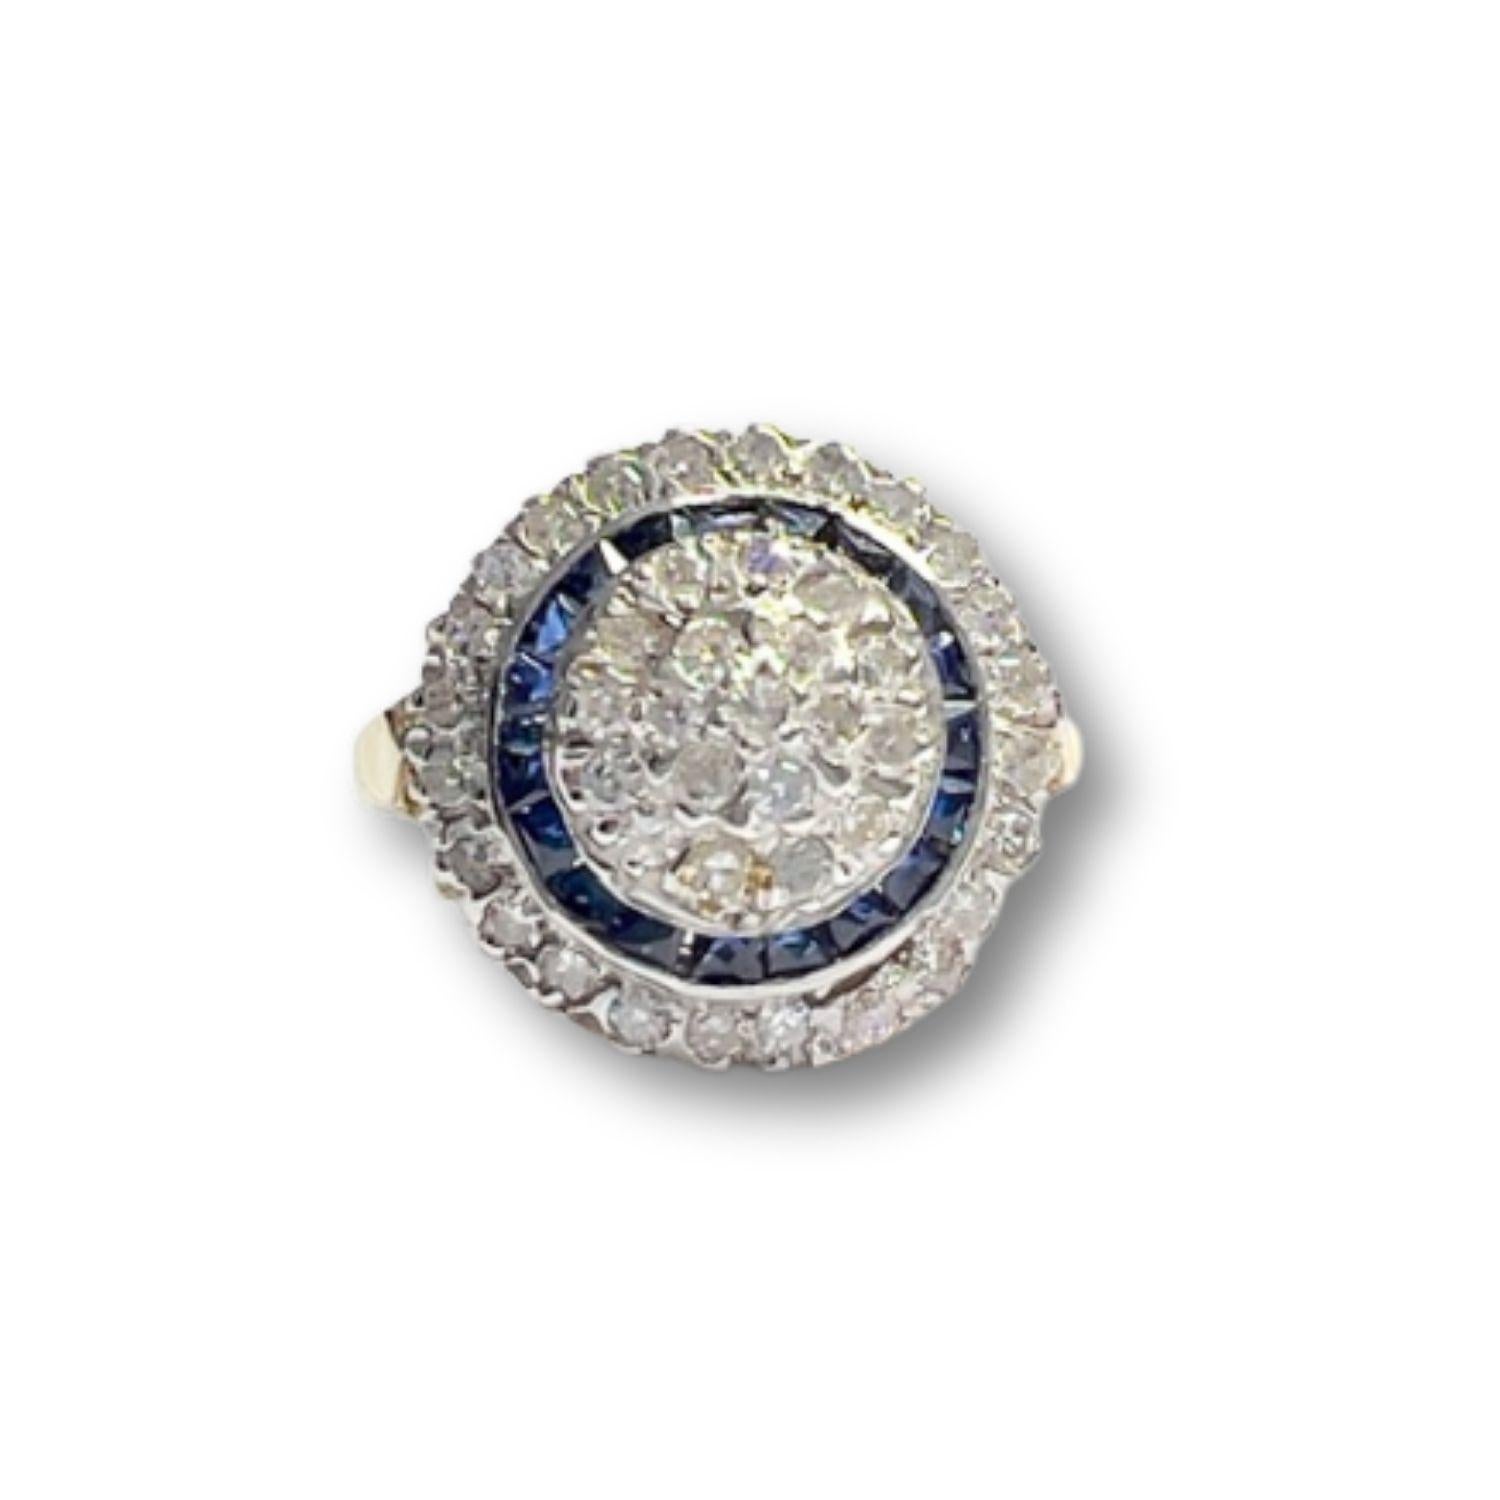 Women's 1940-1945 Art Deco Style Diamonds and Sapphire Yellow Gold and Platinum Ring